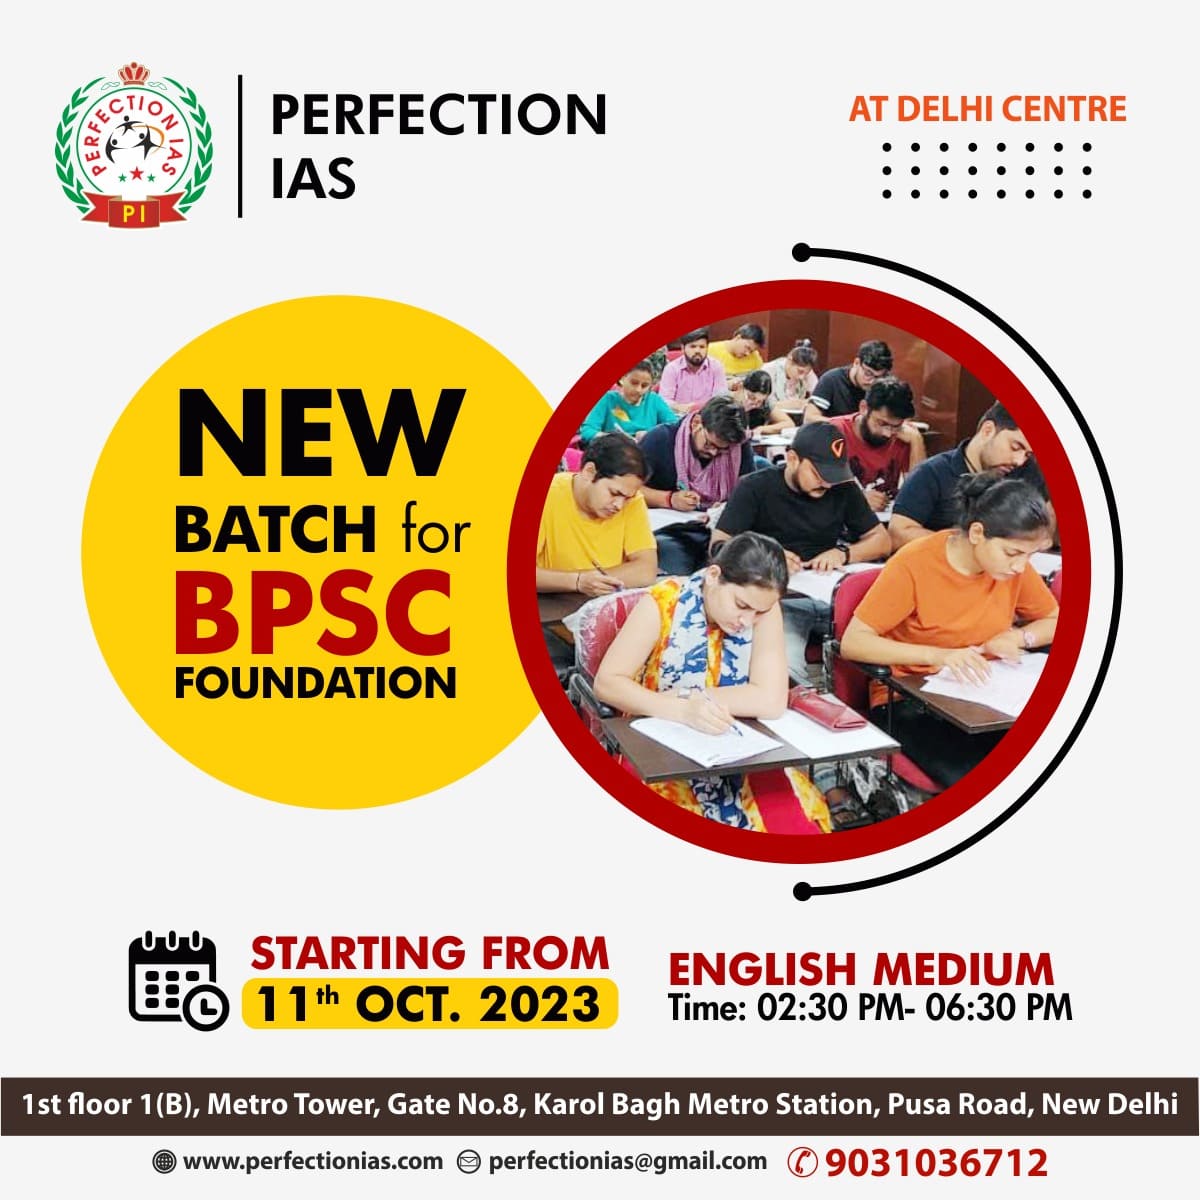 New Batch For BPSC Foundation is Starting From 11th October 2023